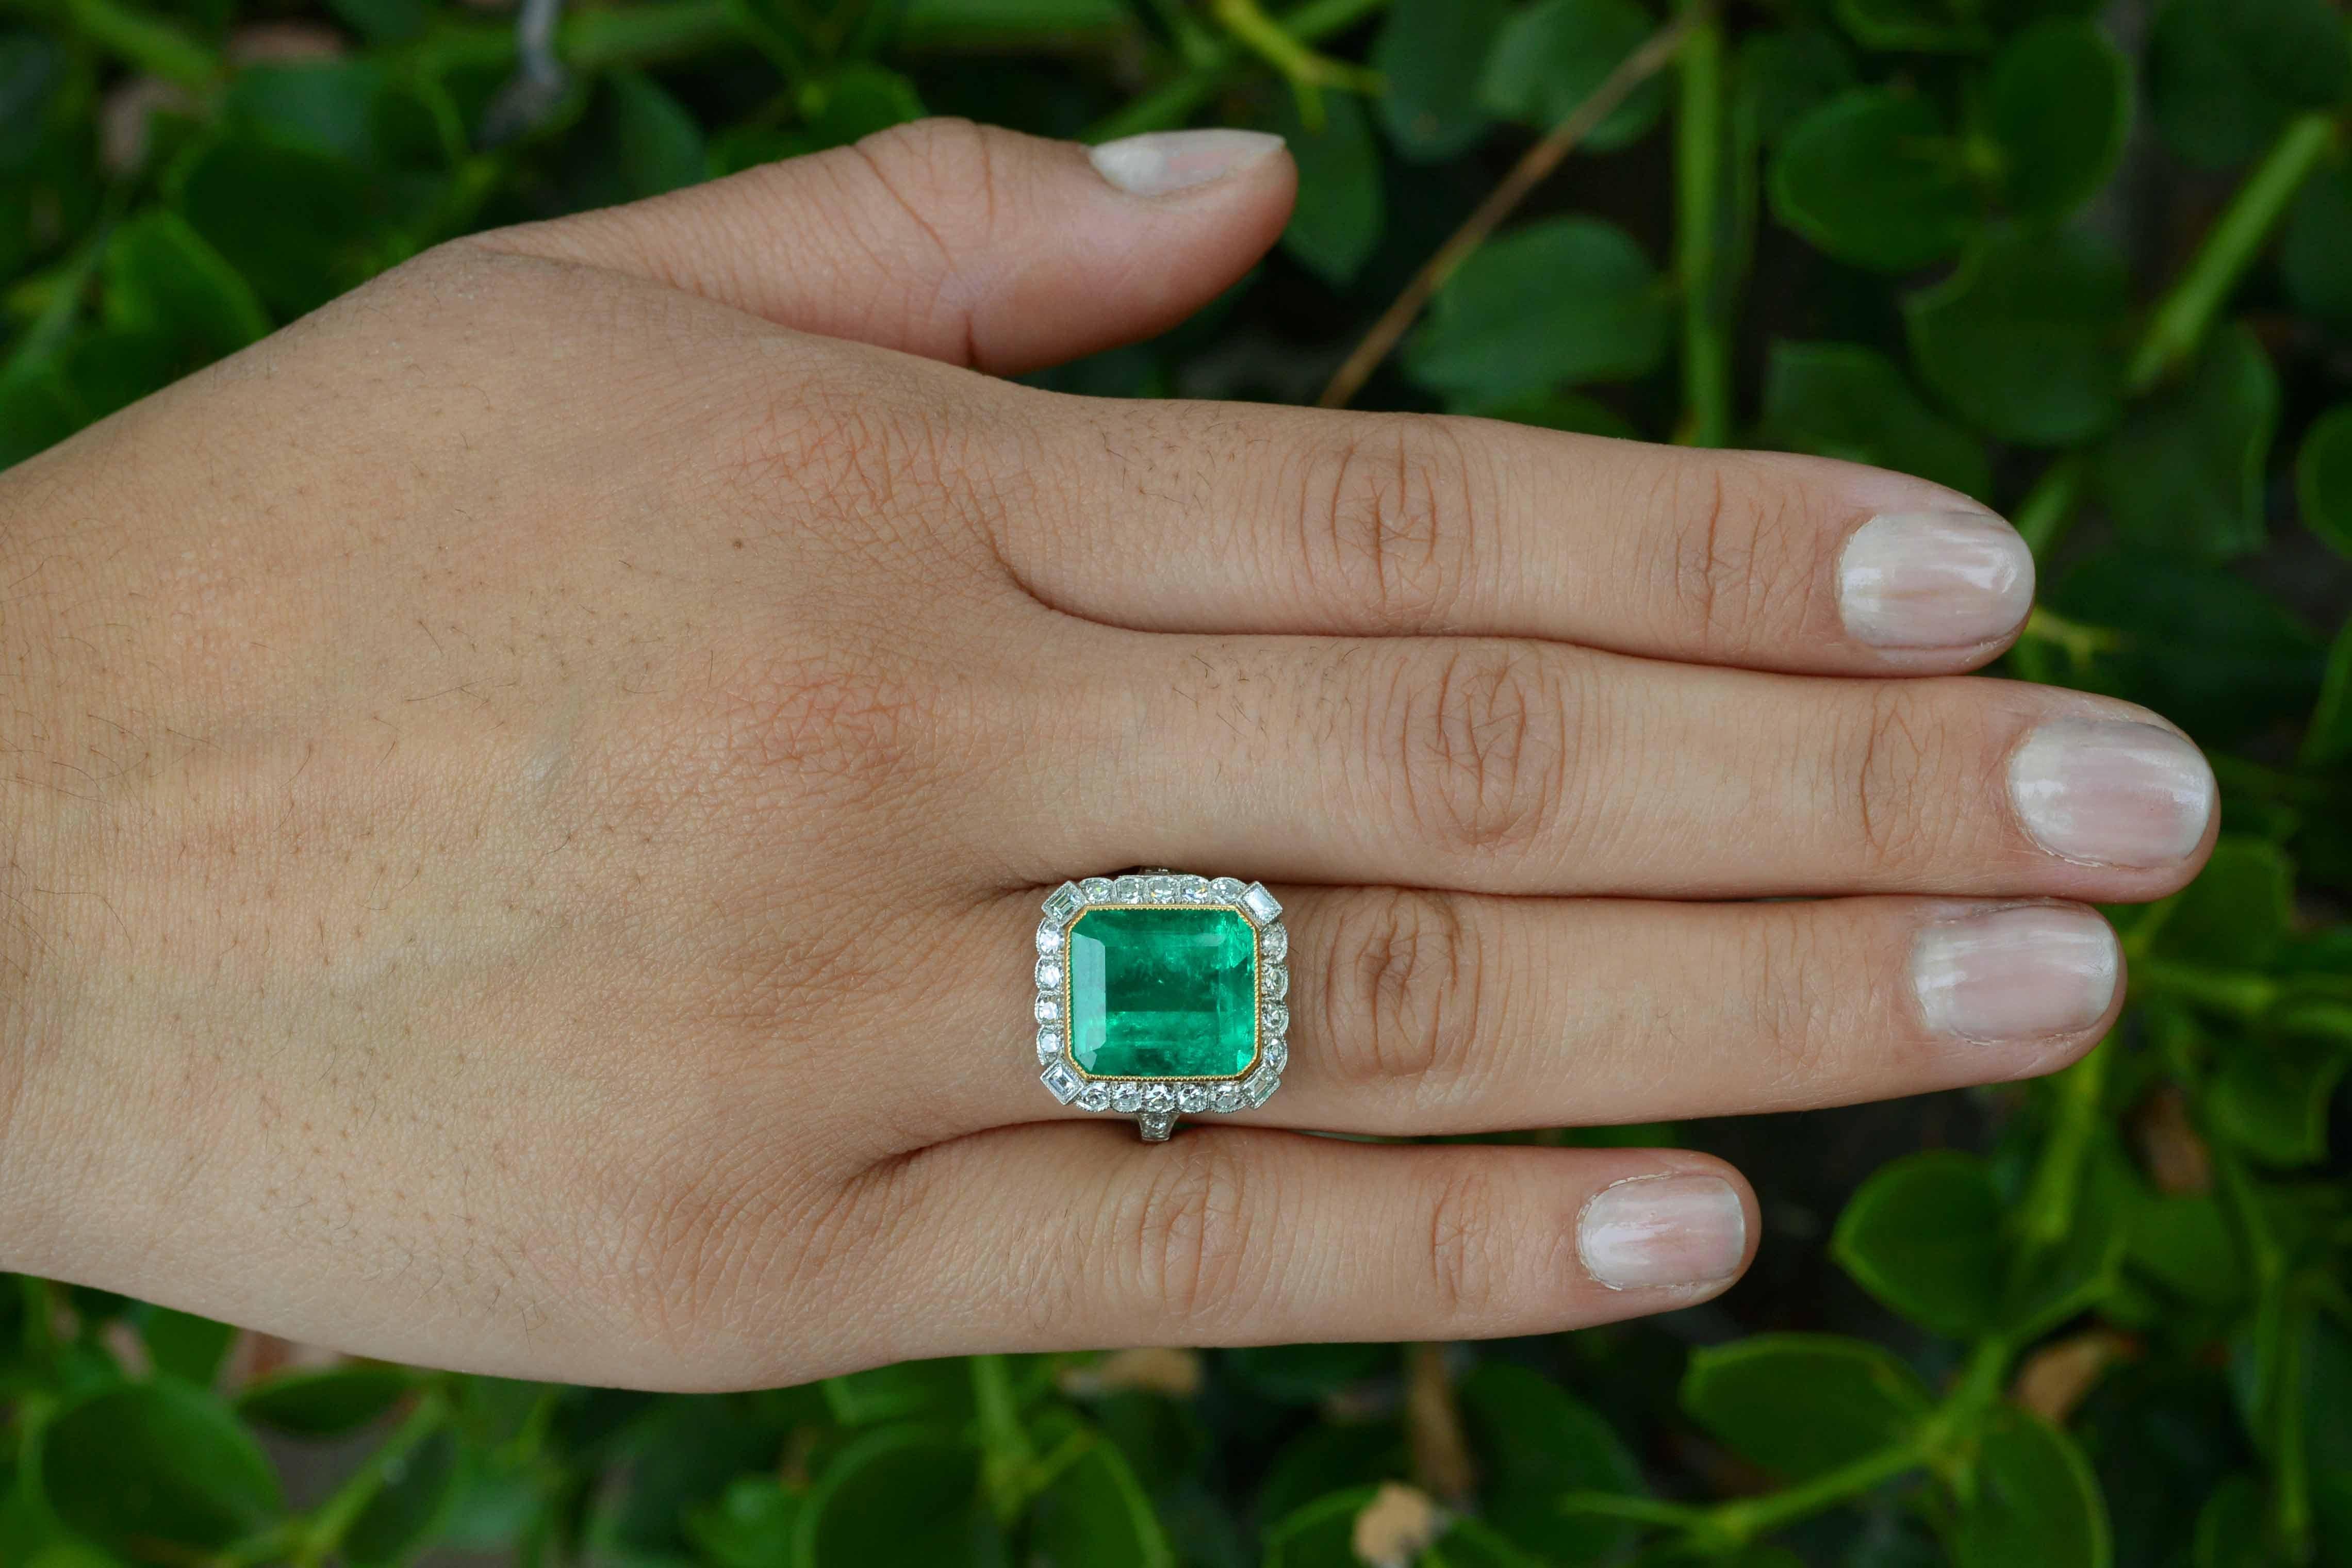 You will be instantly captivated by the lush, verdant green Emerald, weighing a substantial 6.70 carat with a richly saturated, vivid, medium-dark tone. Fabricated in an Art Deco revival platinum setting with a fascinating pierced, openwork under